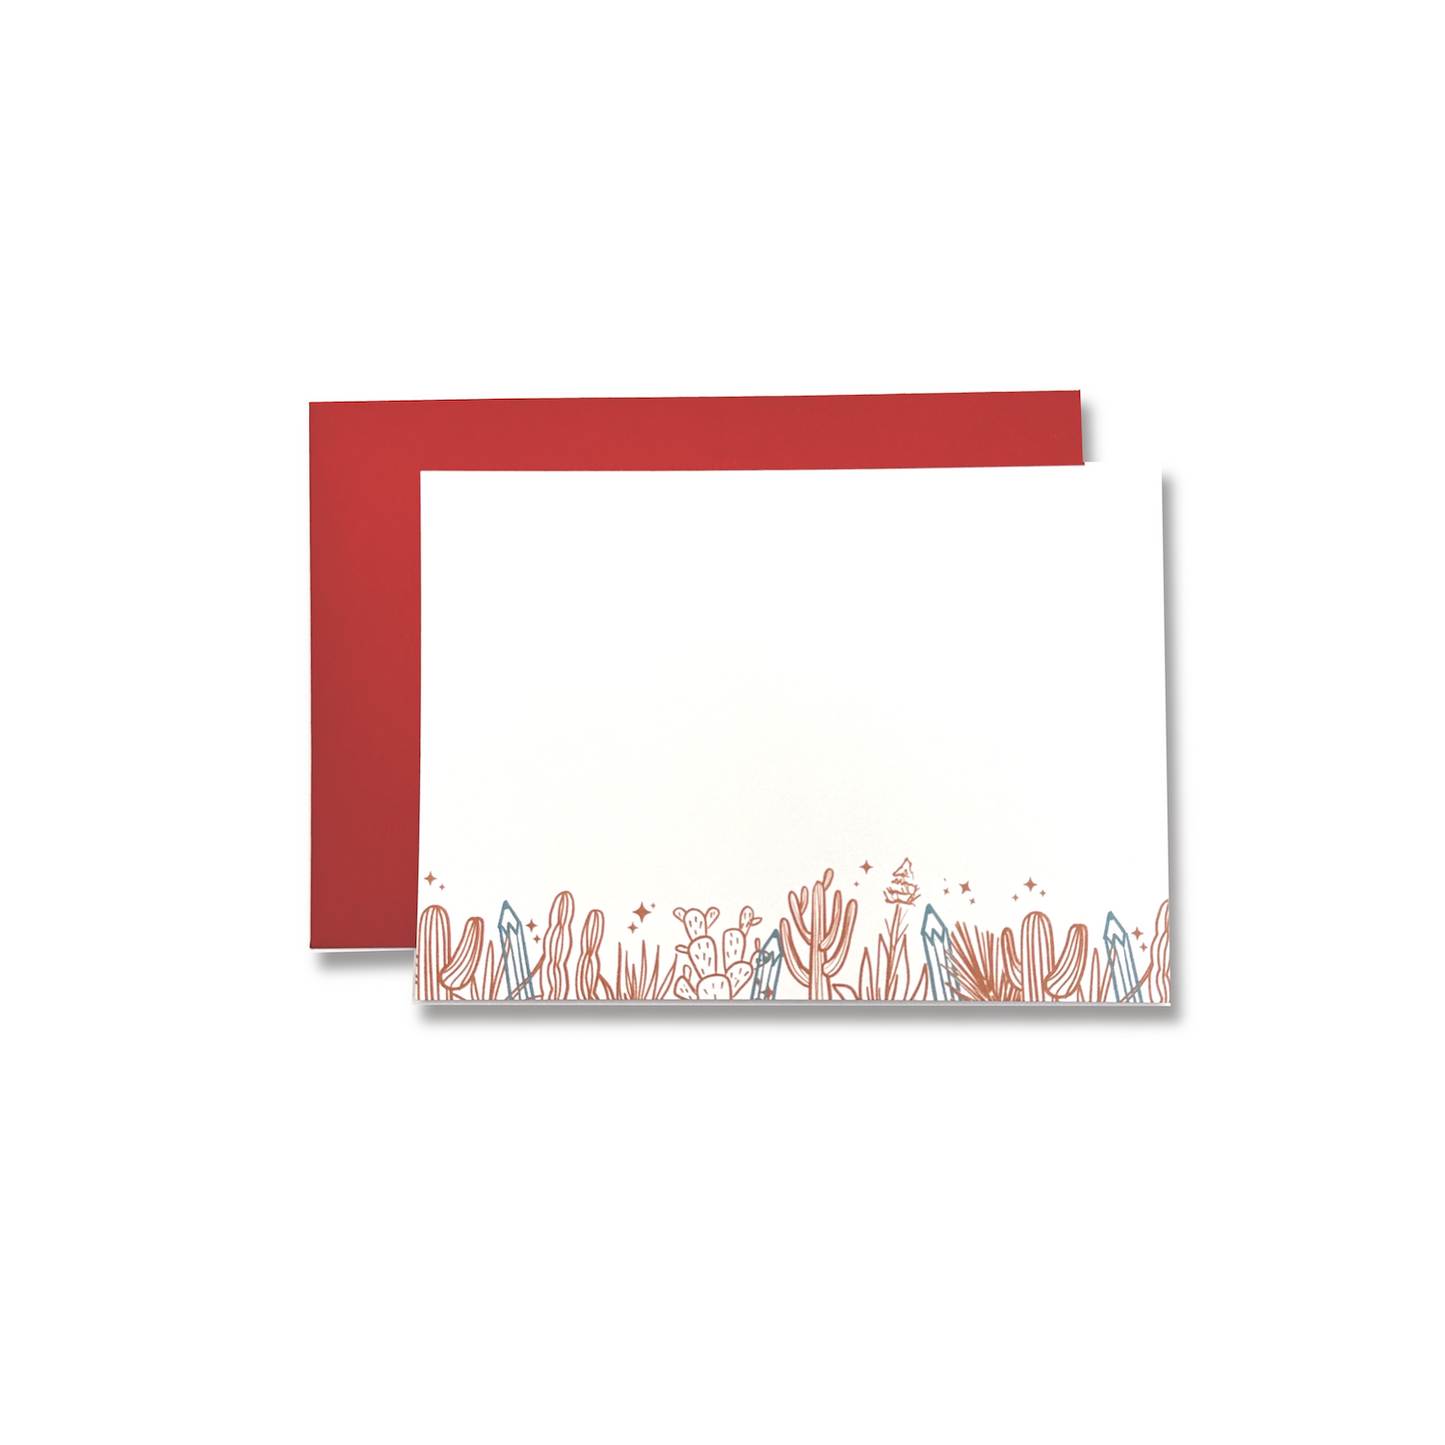 Flat card and rust red envelope centered on a white background. Flat card is 3.5 x 5 inches, landscape orientation, white background with illustrations on the lower fifth of the card. The illustration is a line drawing of cactus and agave in rust red ink and four pencils pointy side up in blue ink hiding amongst the plants.